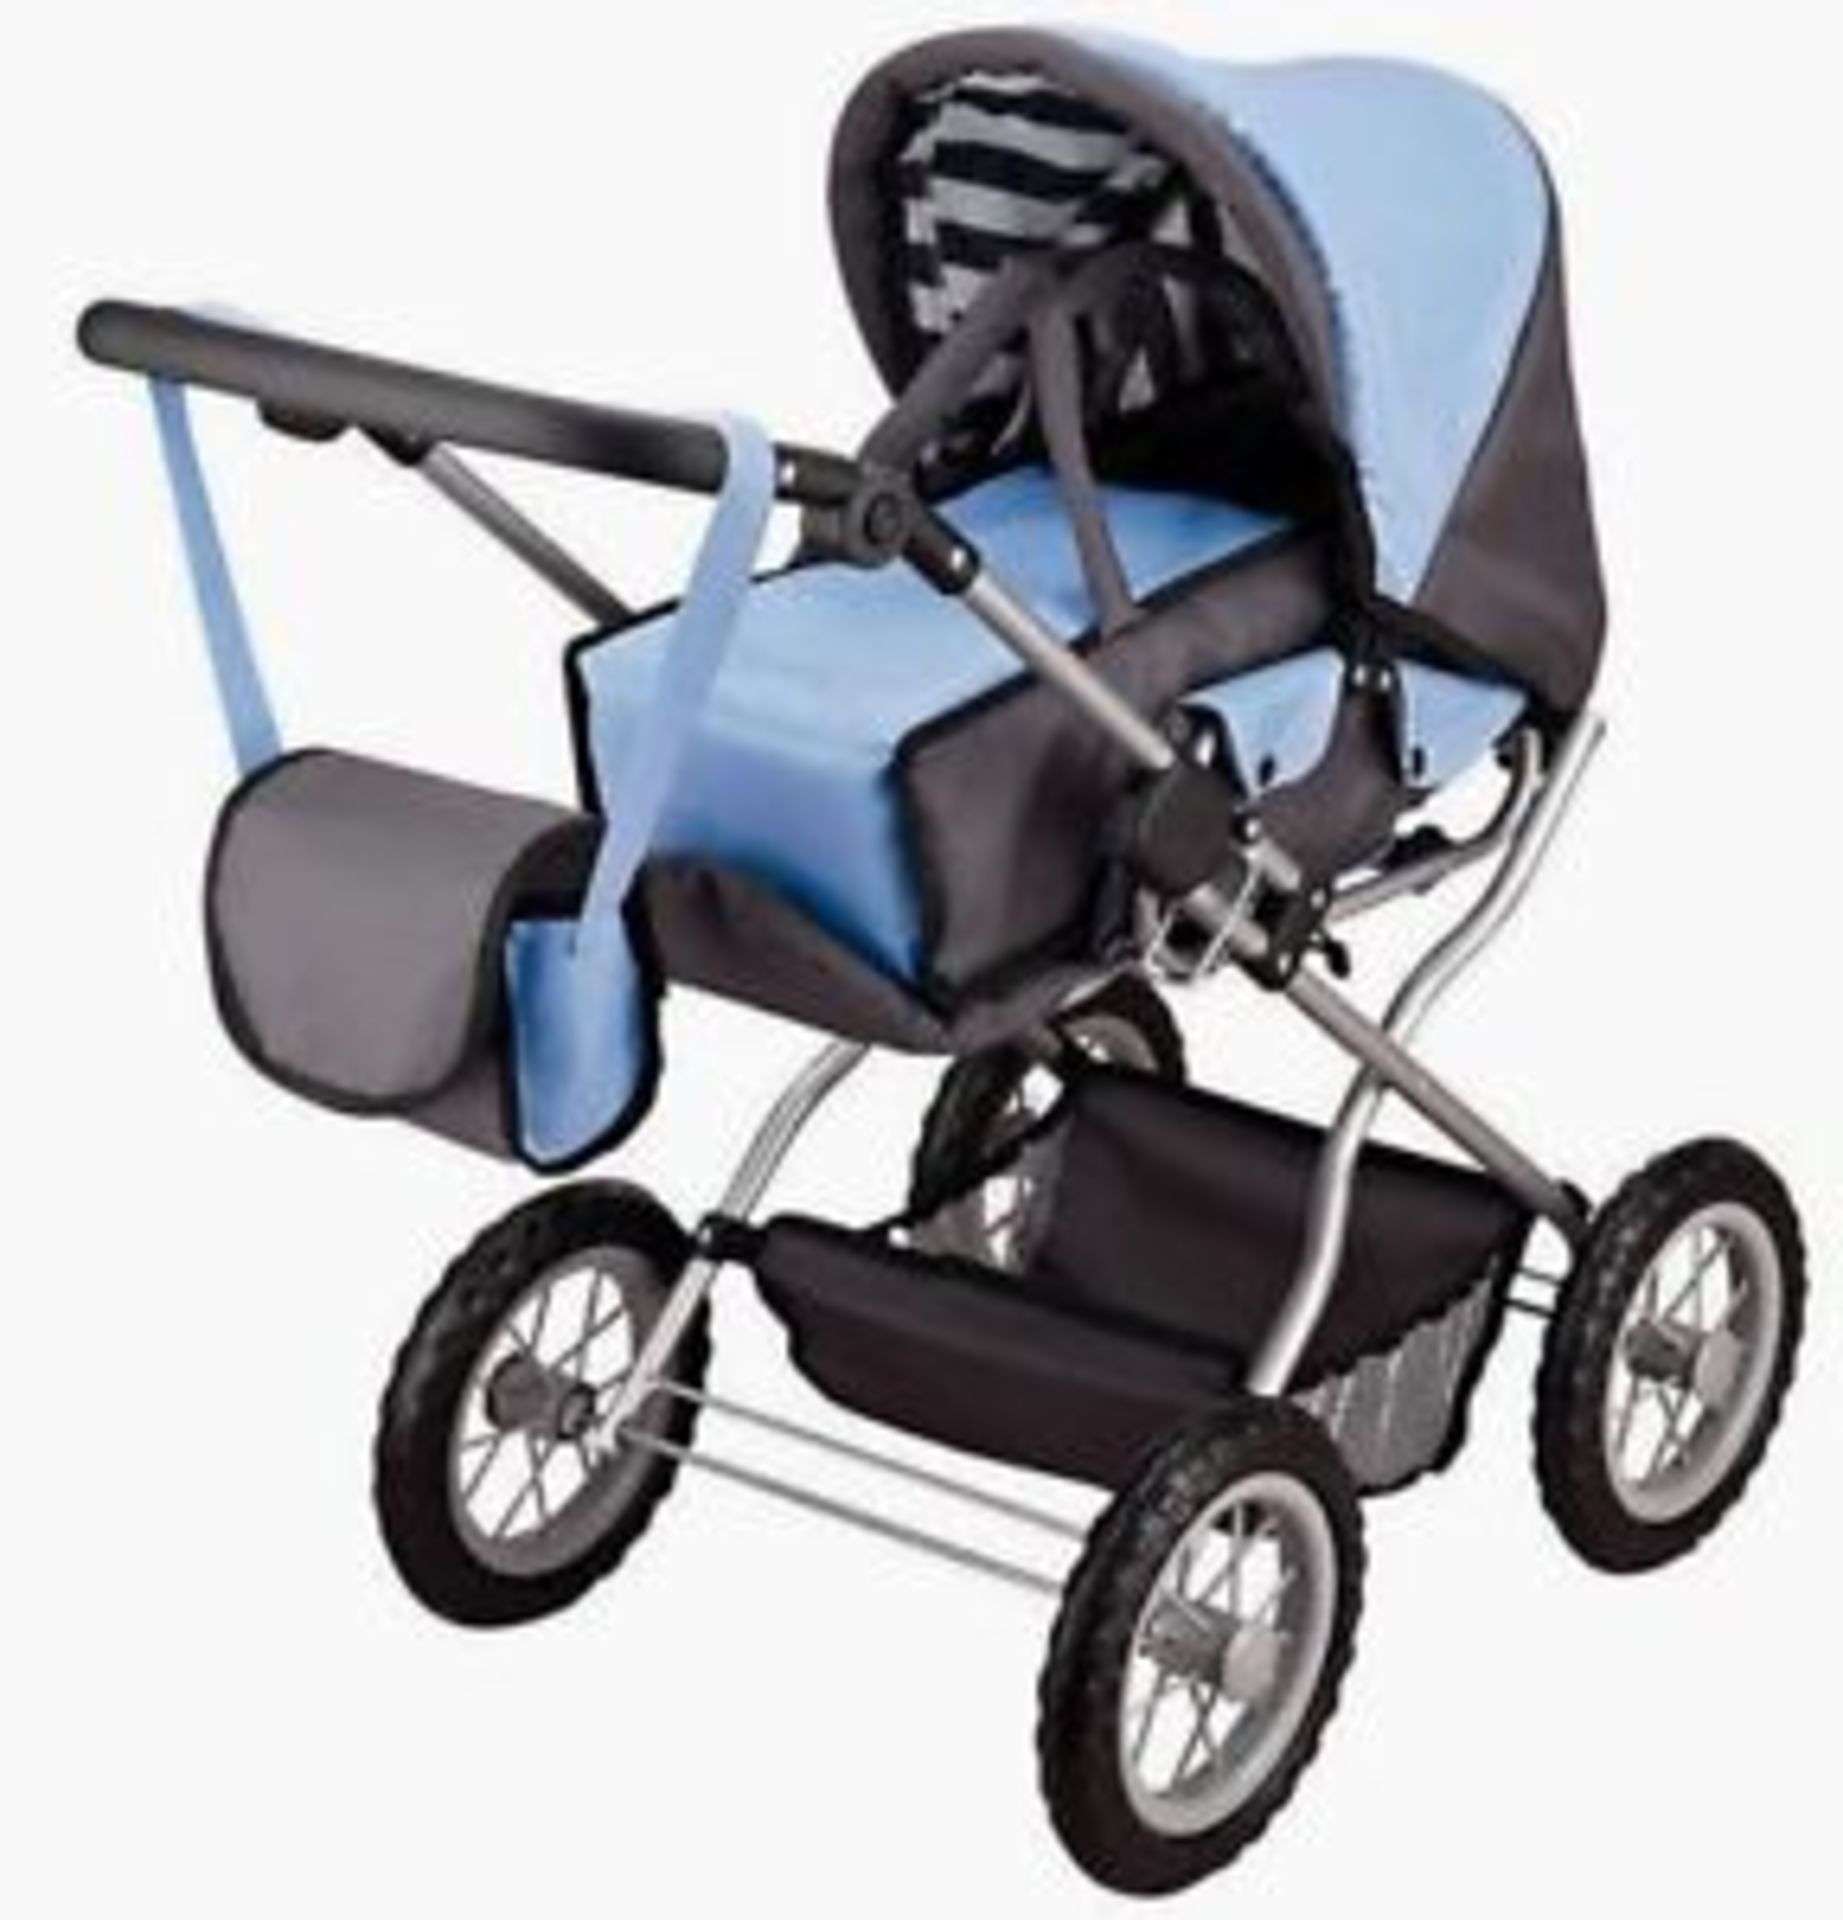 1 x BOXED LARGE COMBI PRAM (17.10.17) *PLEASE NOTE THAT THE BID PRICE IS MULTIPLIED BY THE NUMBER OF